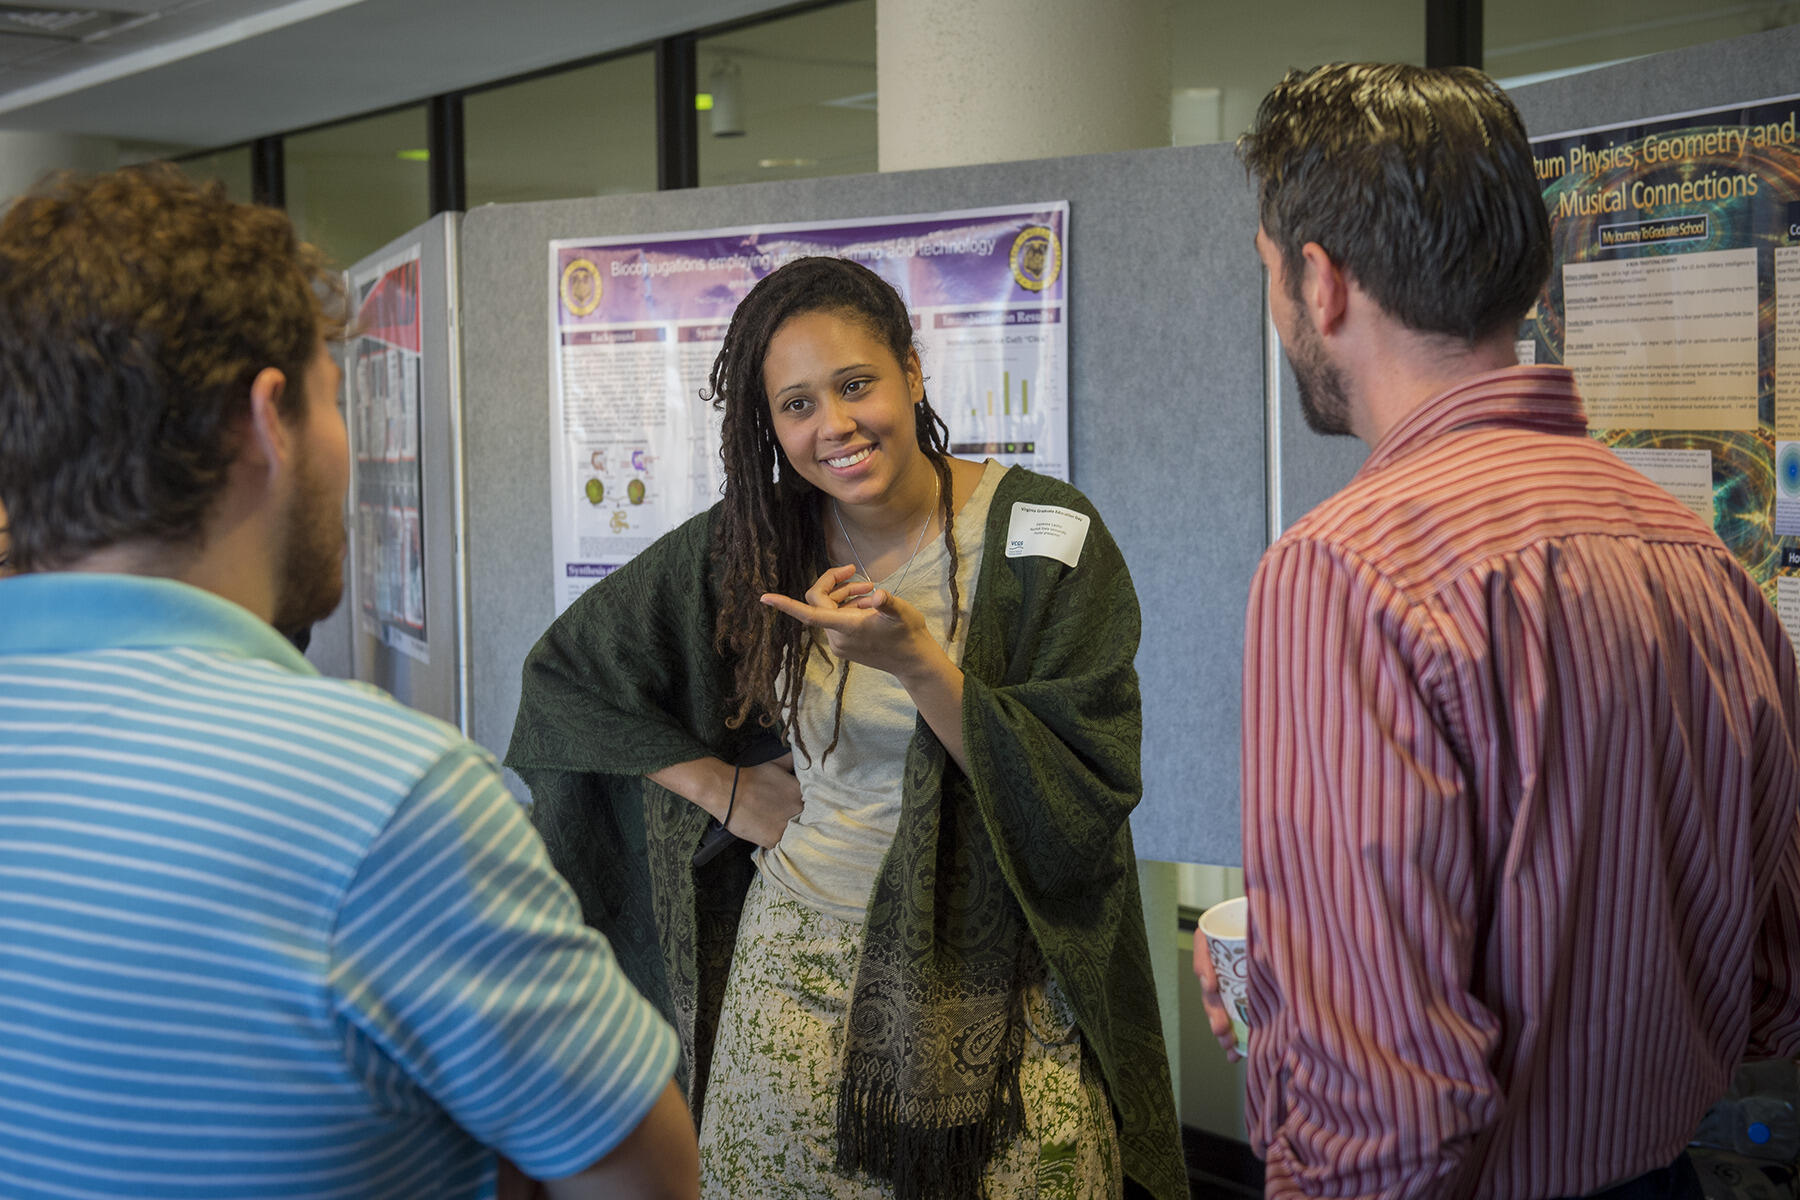 Poster presentations were held during Commonwealth Graduate Education Day.